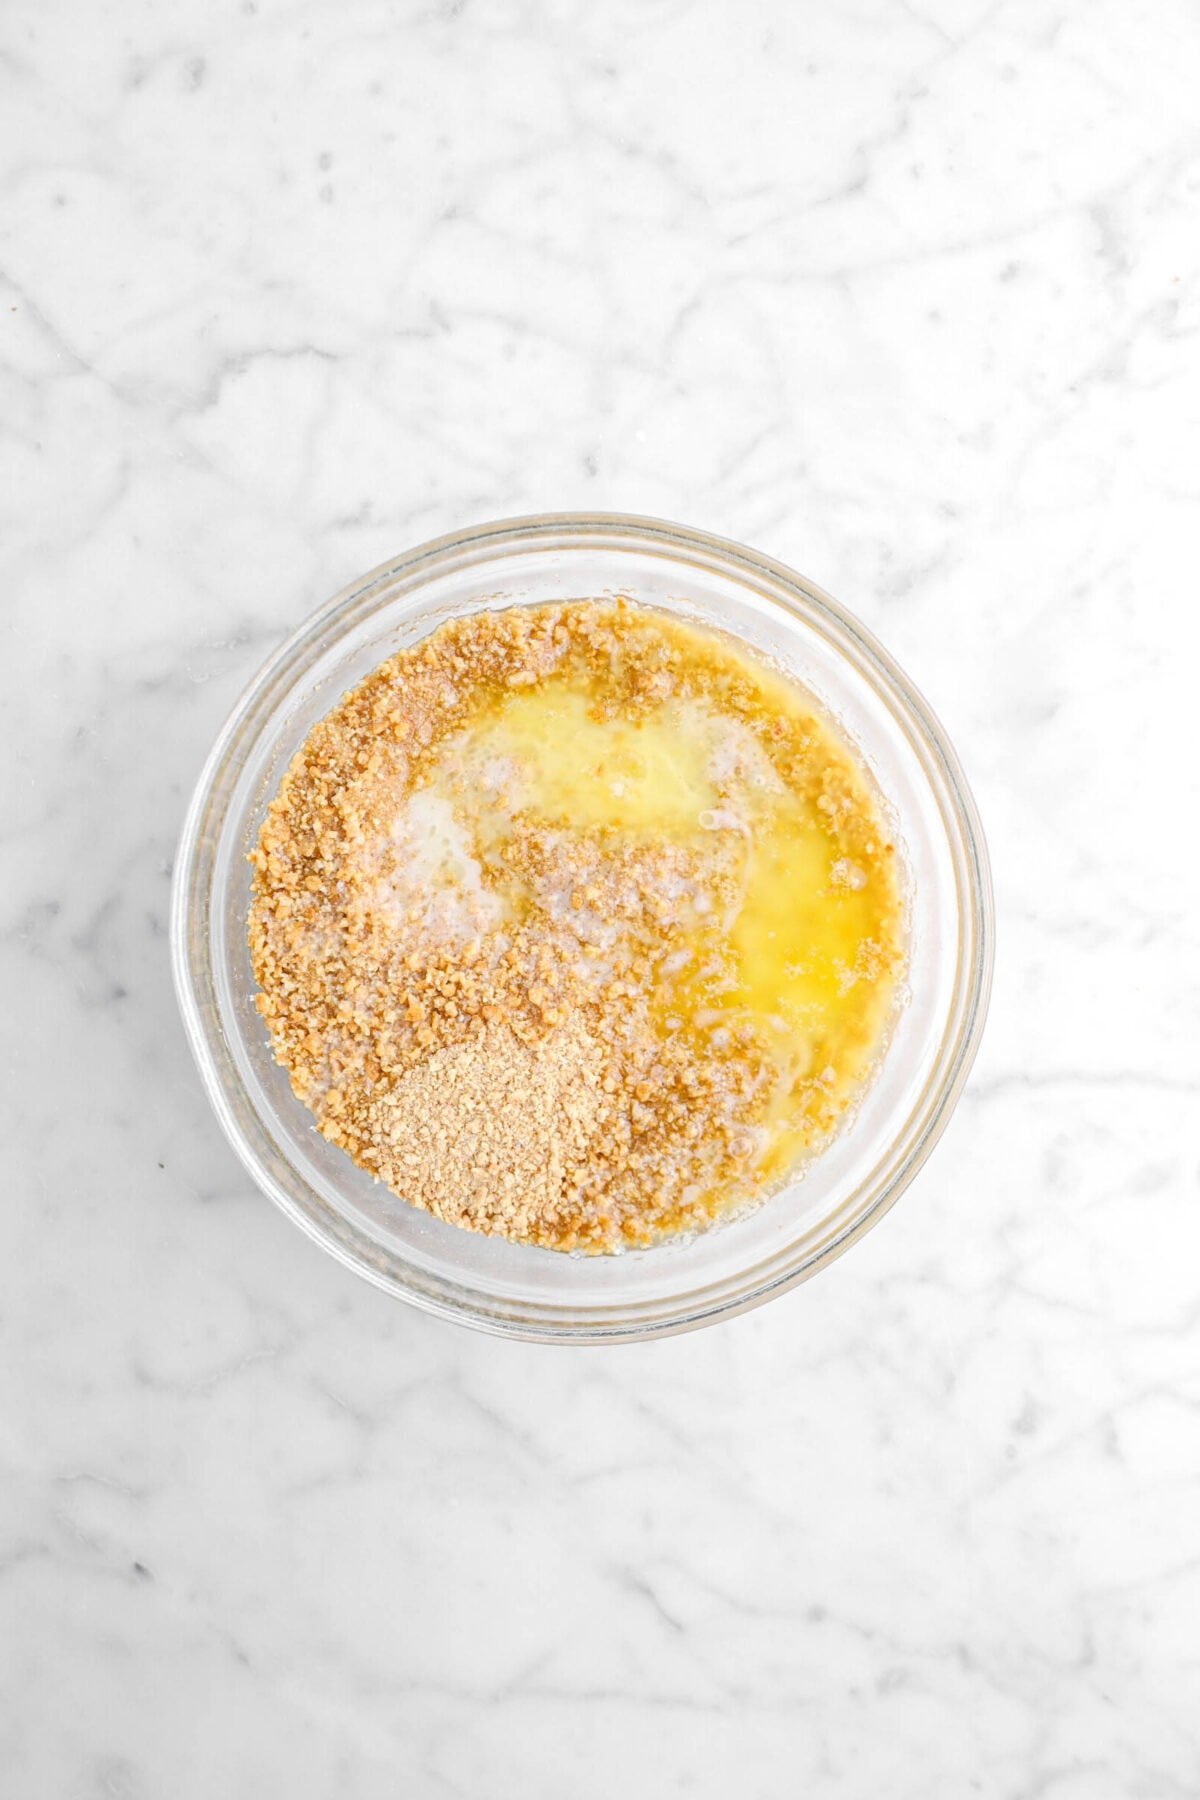 melted butter and graham cracker crumbs in glass bowl